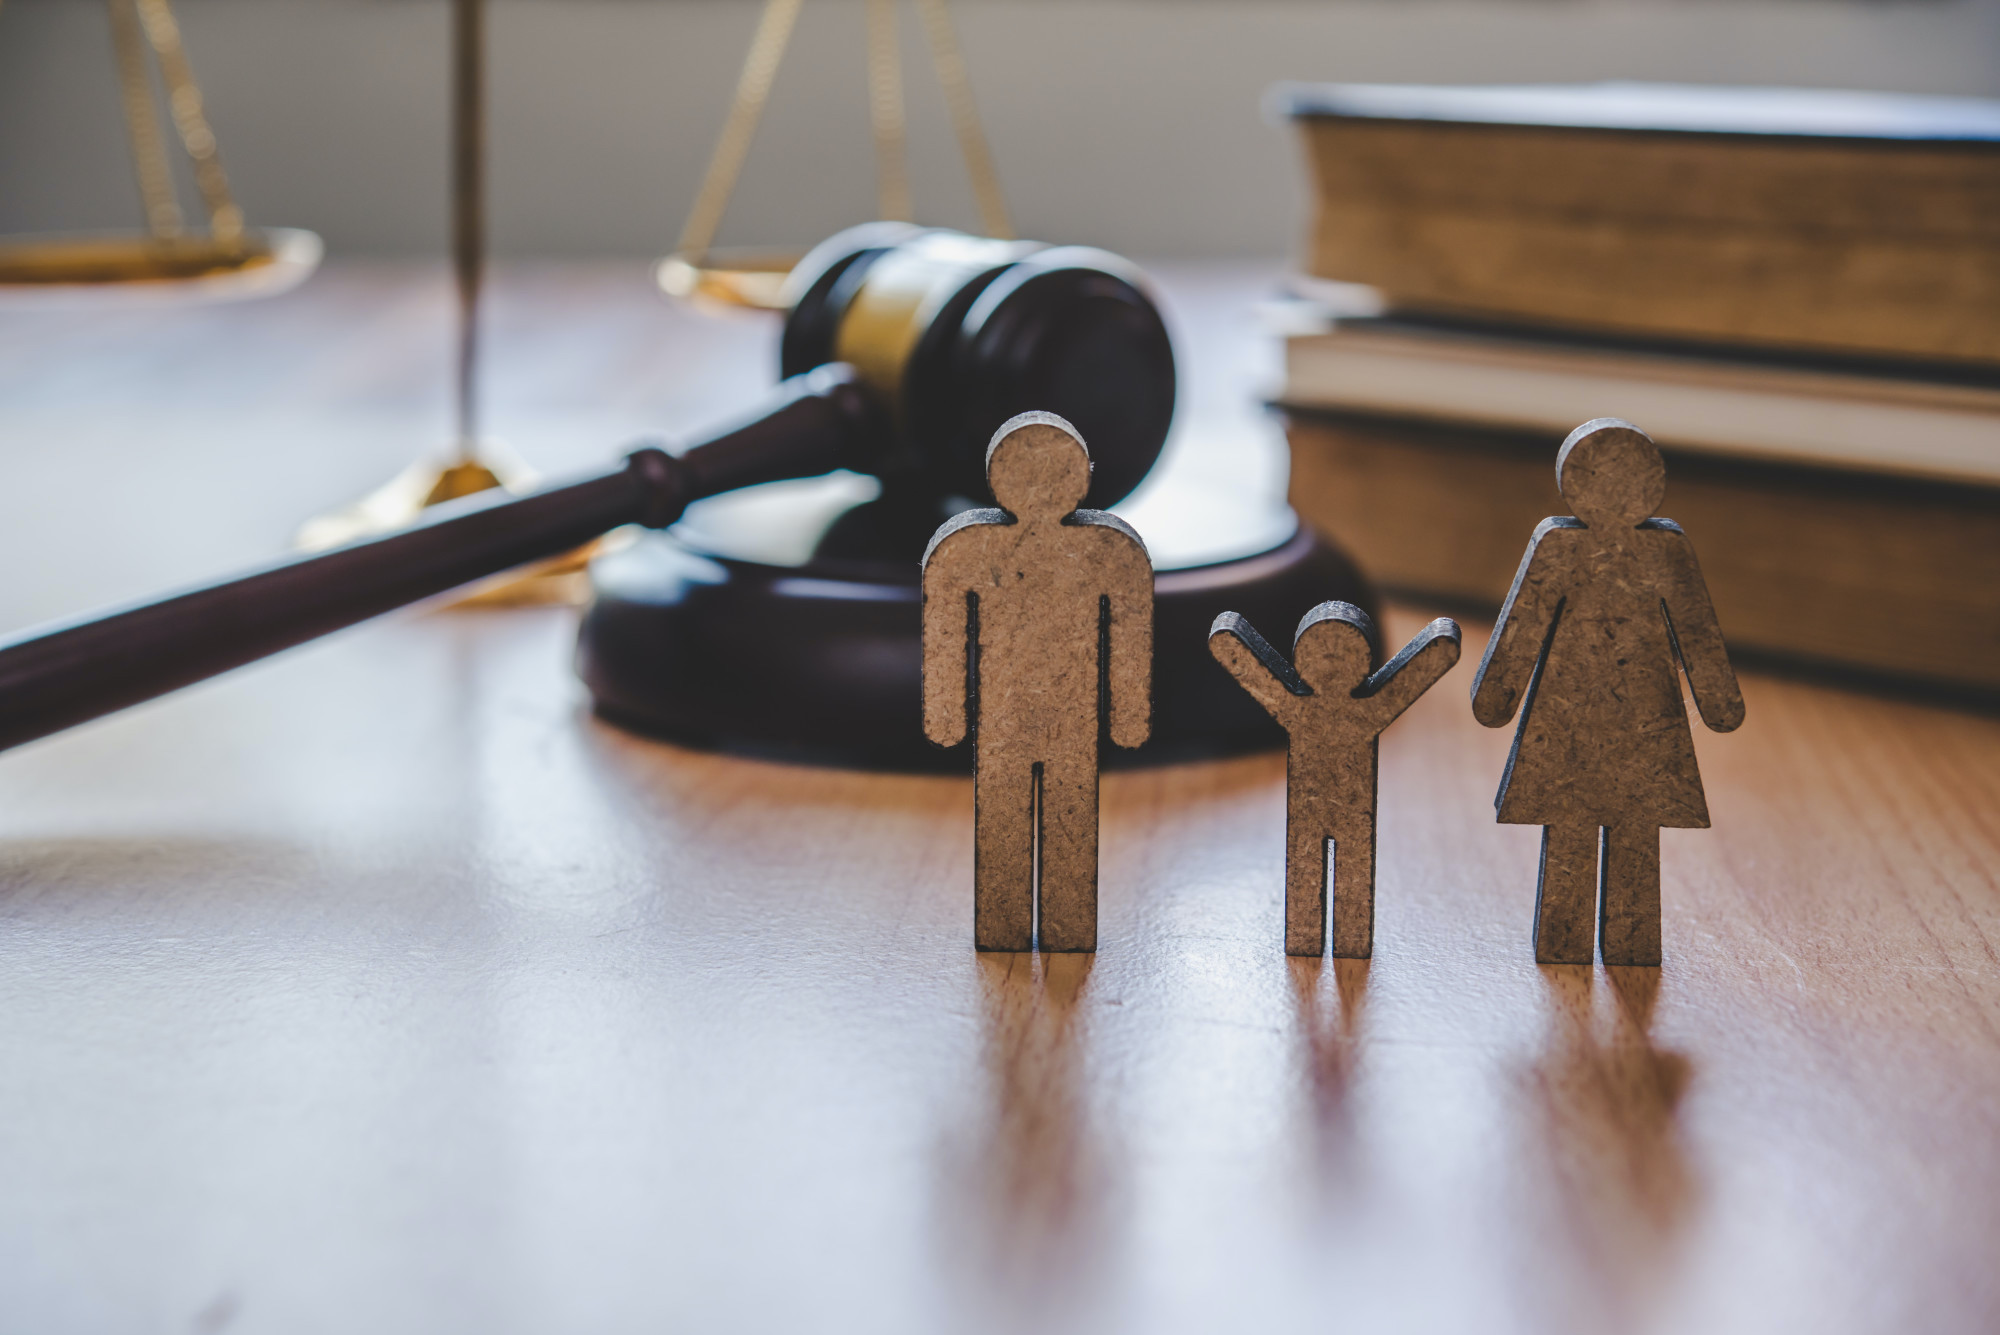 family law